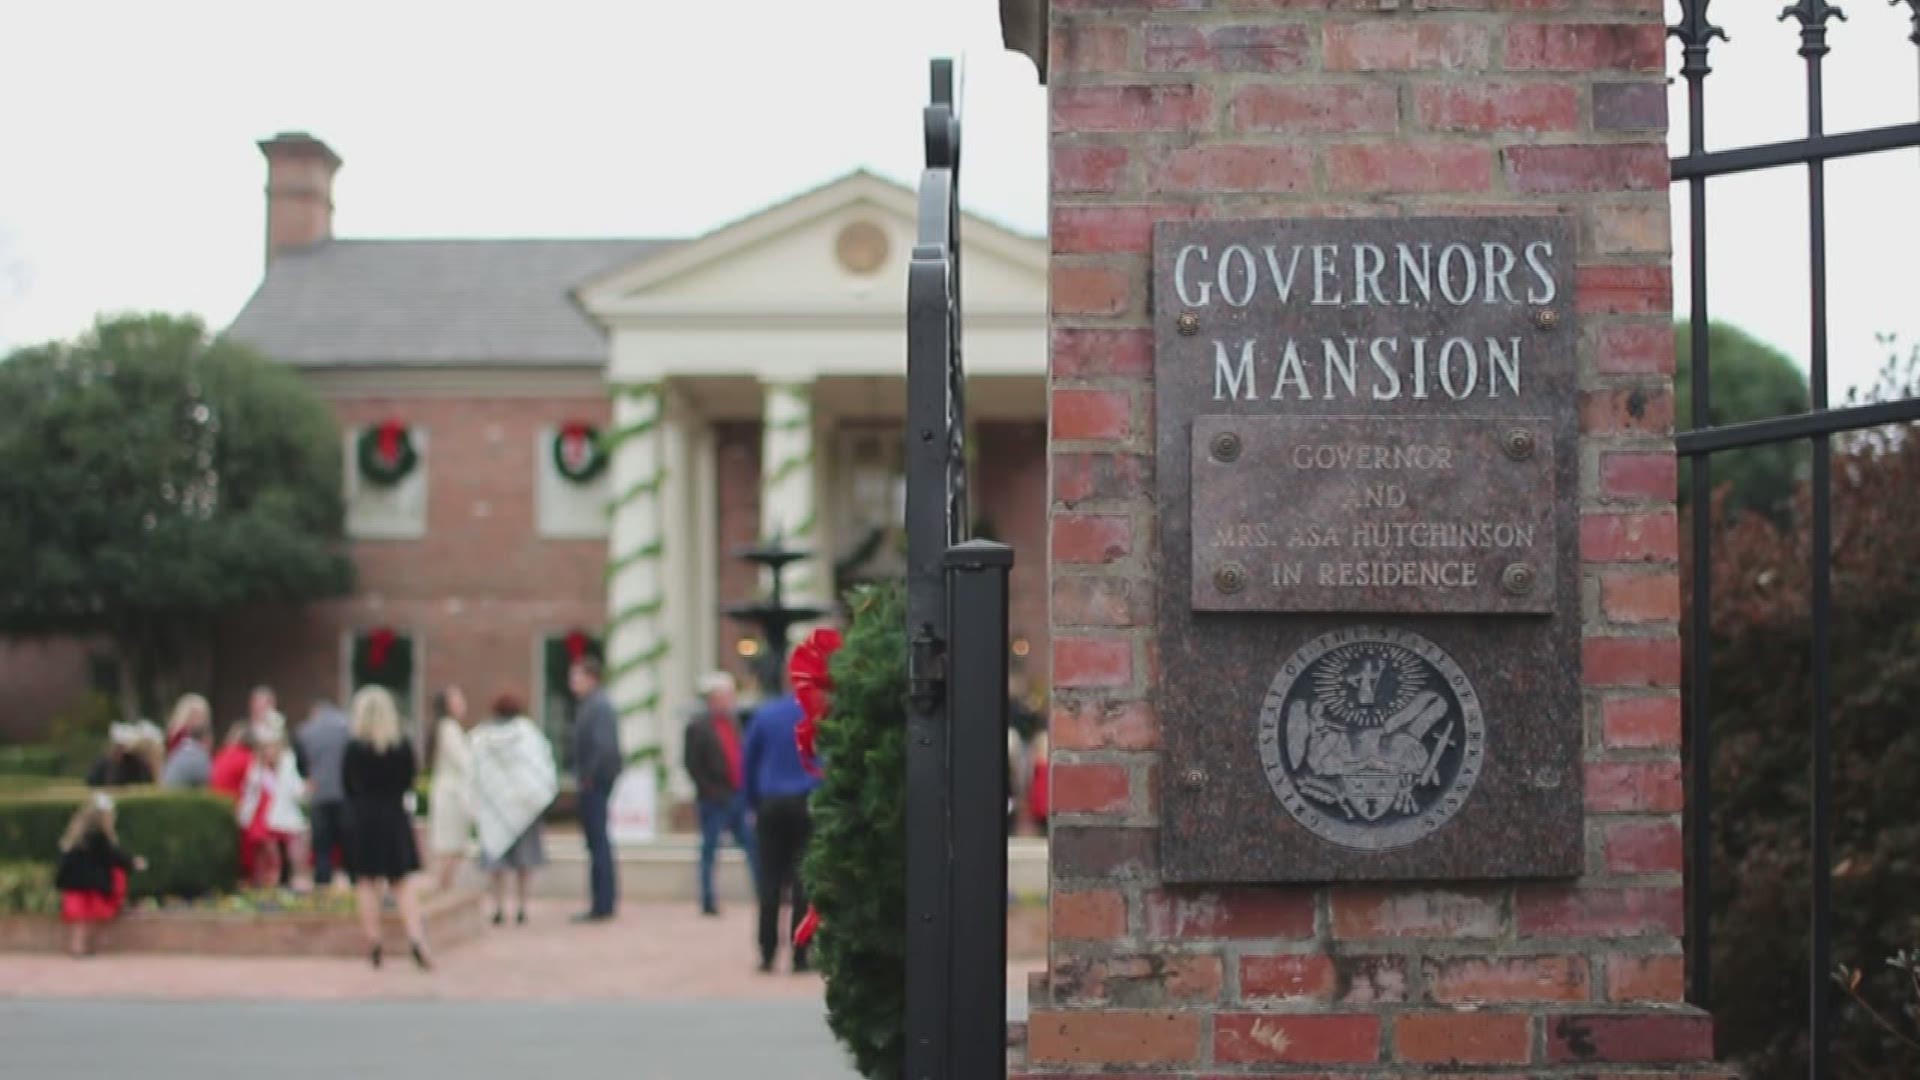 One of the drop-off sites for Toys for Tots was the Governor's Mansion.